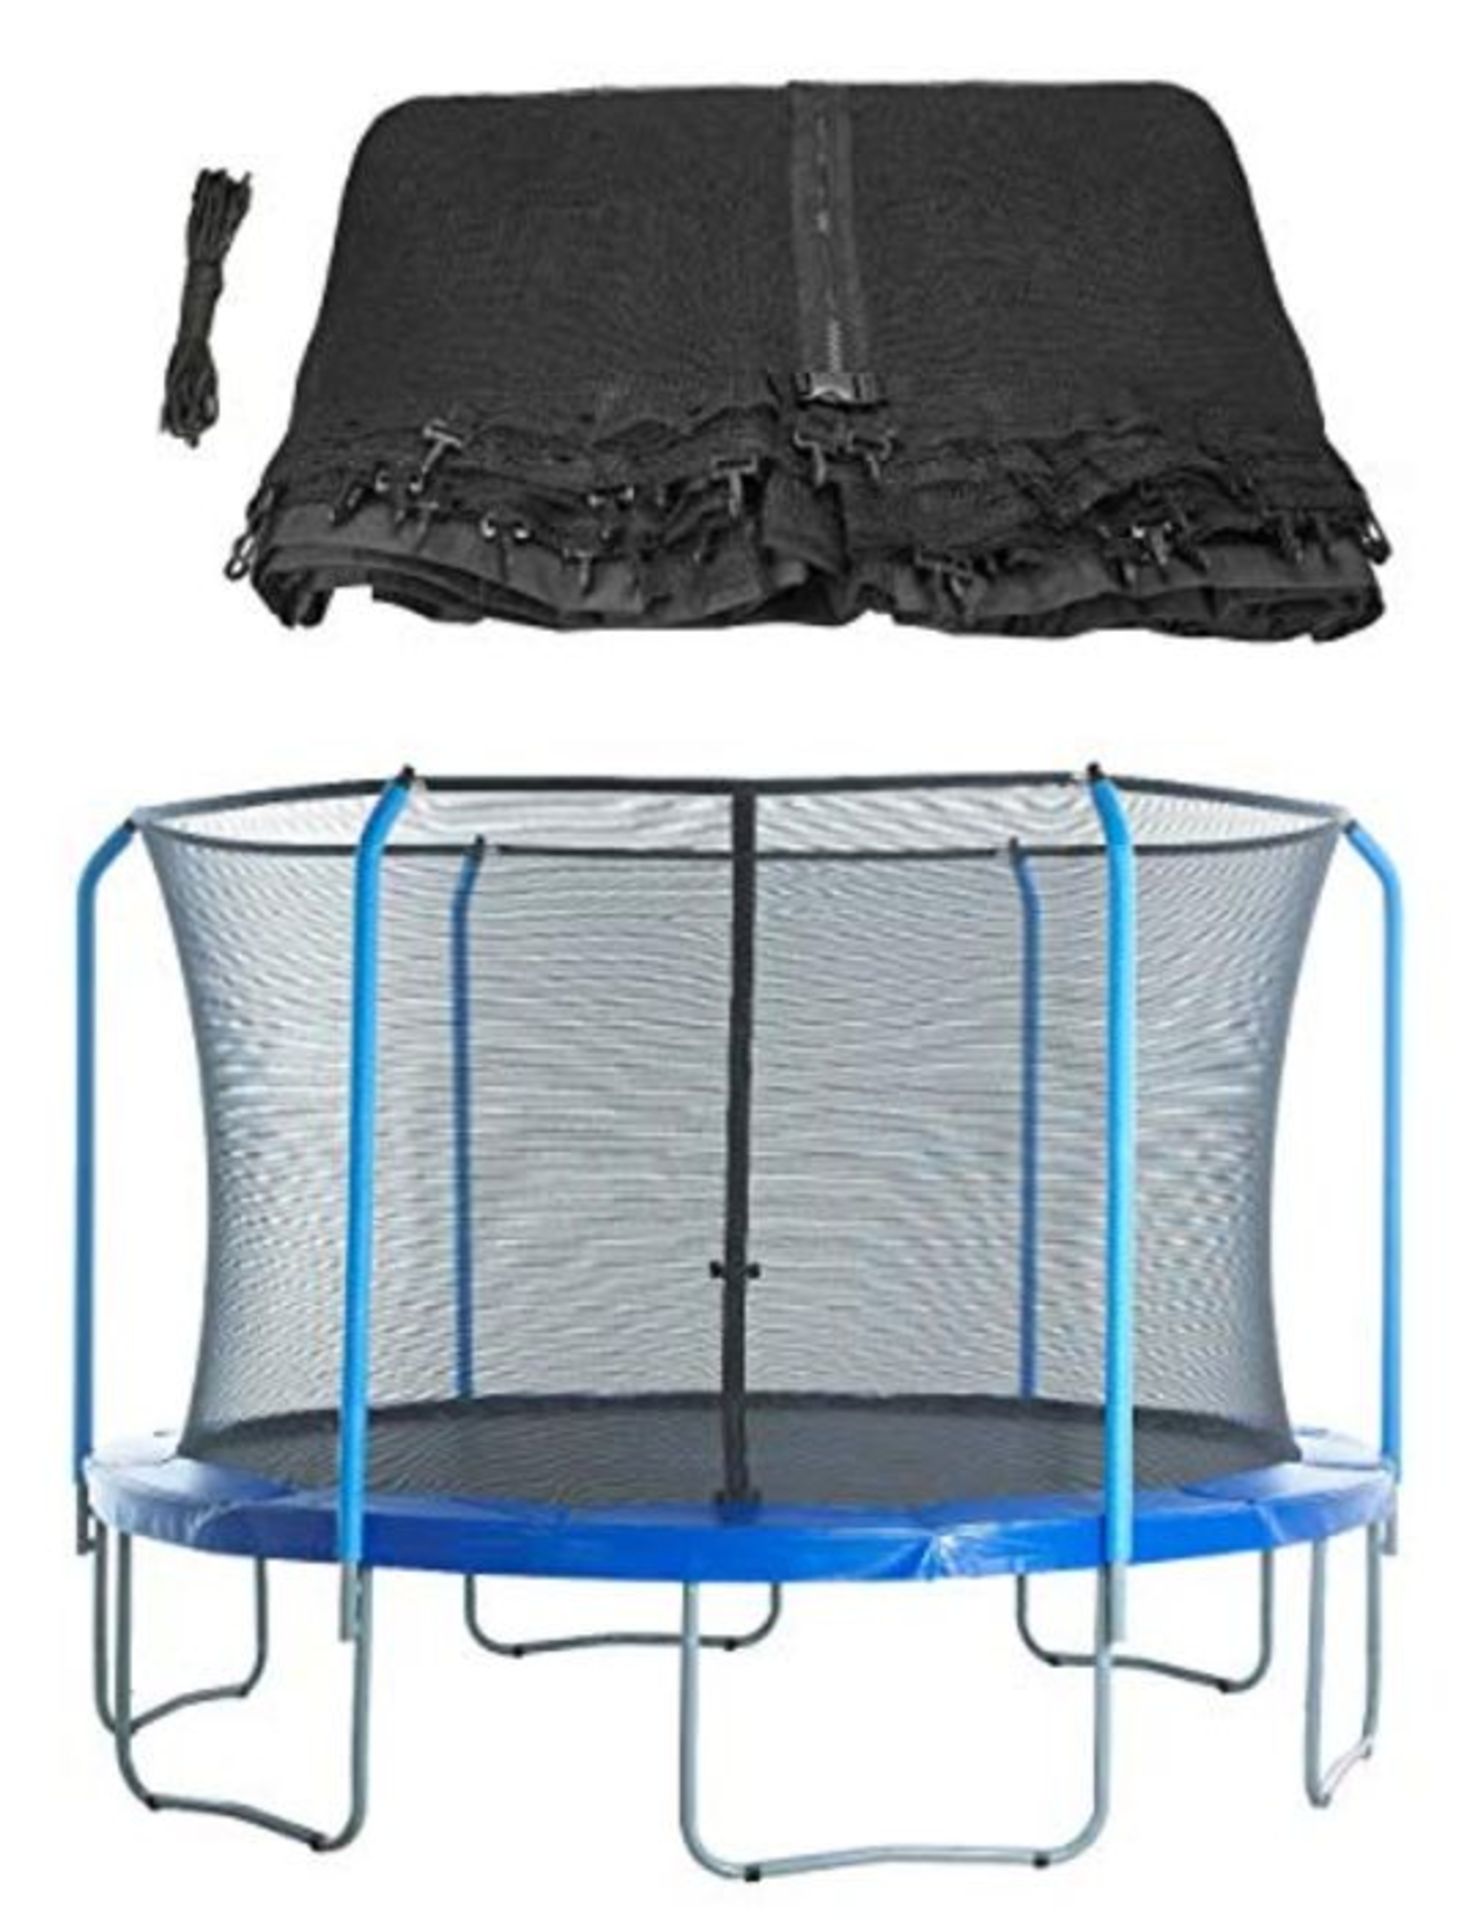 Upper Bounce Trampoline Replacement Enclosure Safety Net Fits For 12' Round Frames Usi - Image 2 of 3